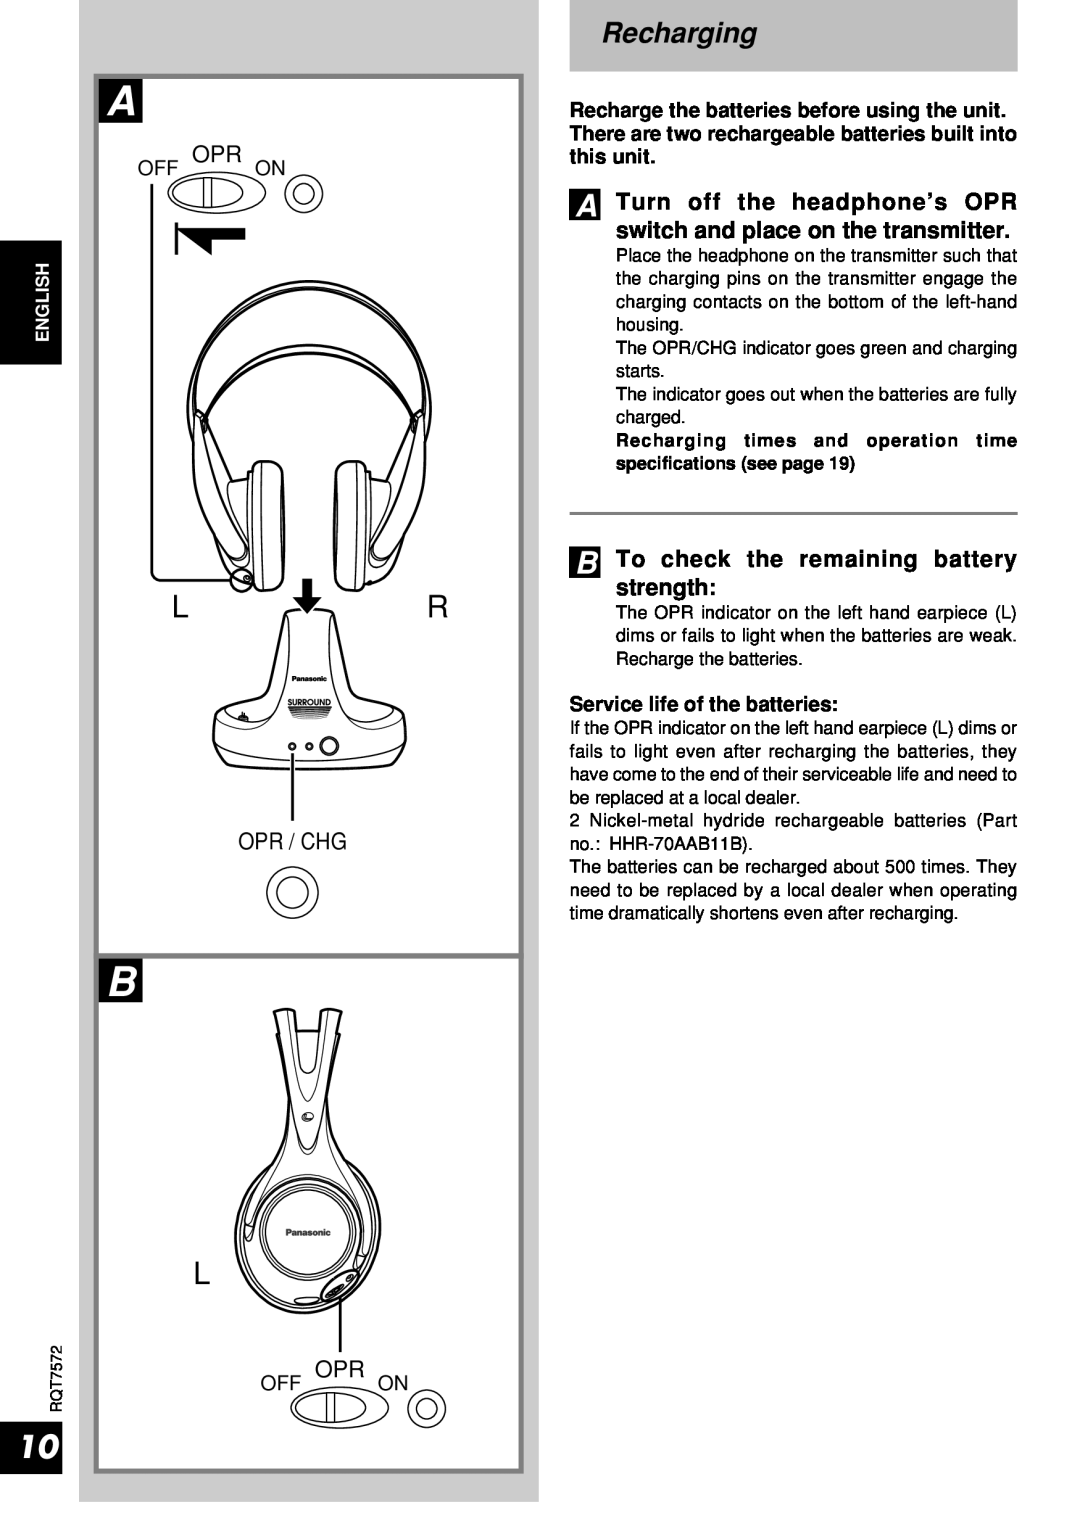 Panasonic RP-WF930 Recharging, …Turn off the headphone’s OPR, switch and place on the transmitter, strength, Opr / Chg 